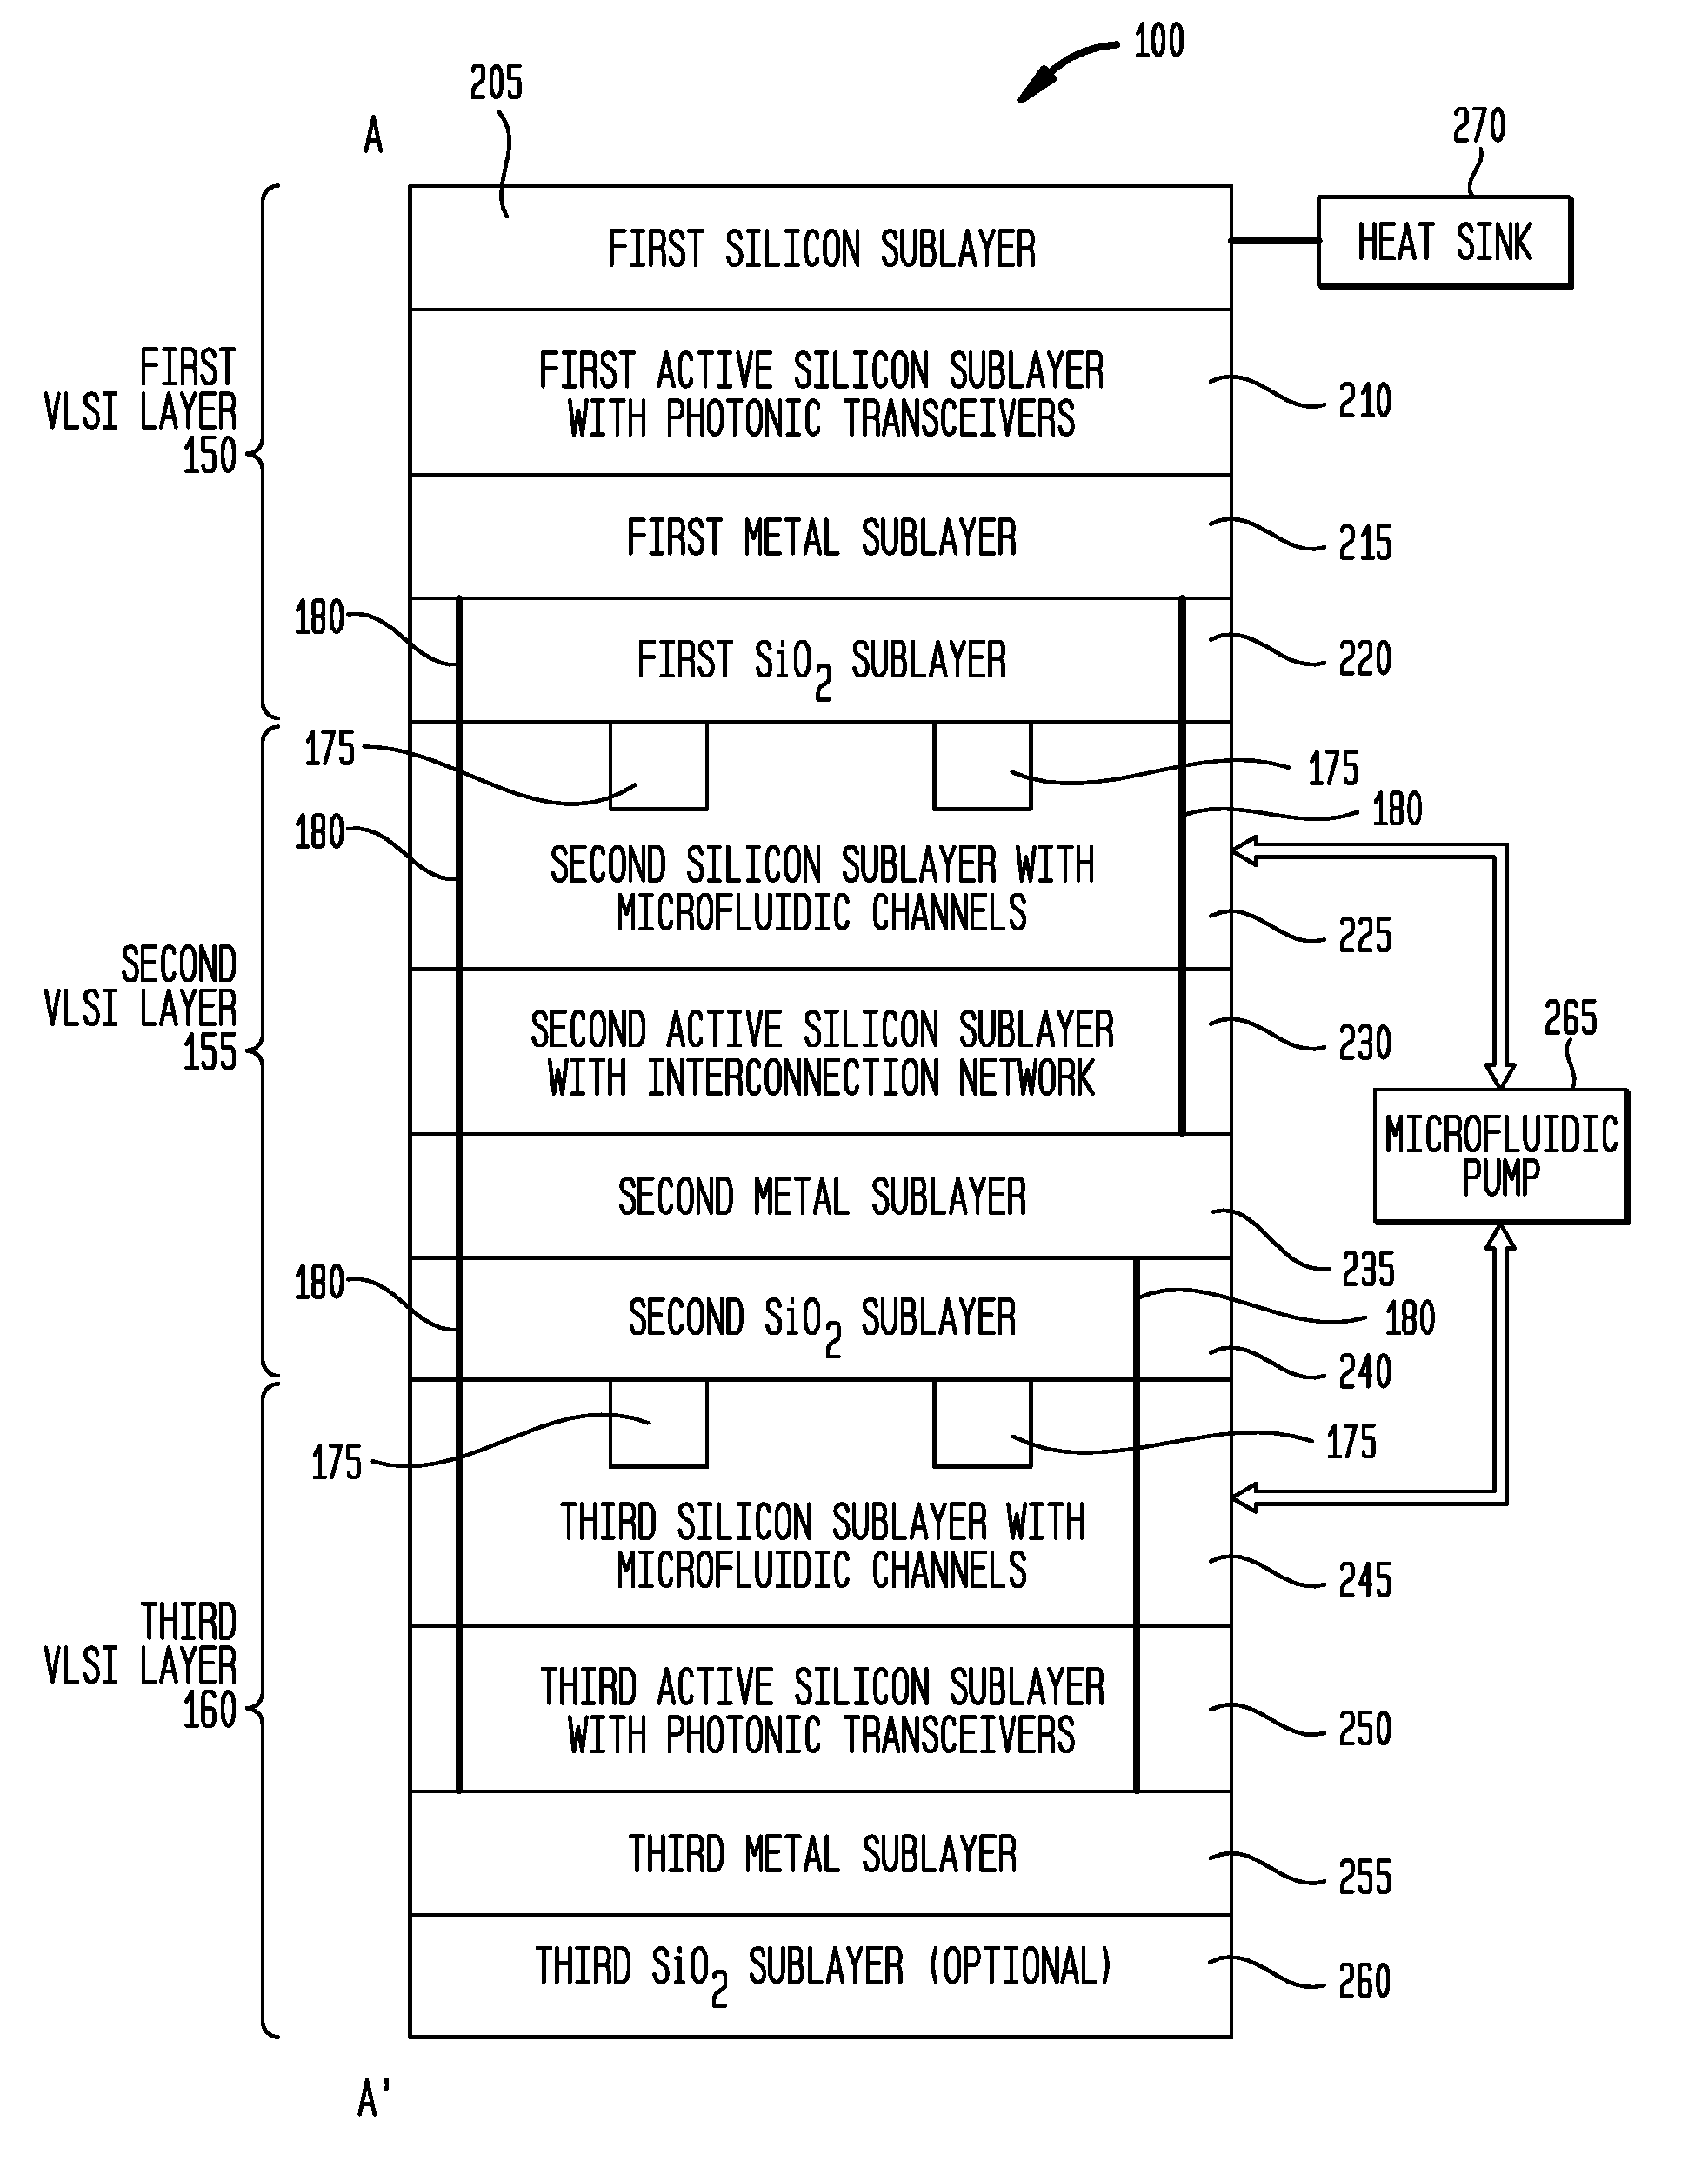 3D VLSI  Interconnection Network with Microfluidic Cooling, Photonics and Parallel Processing Architecture